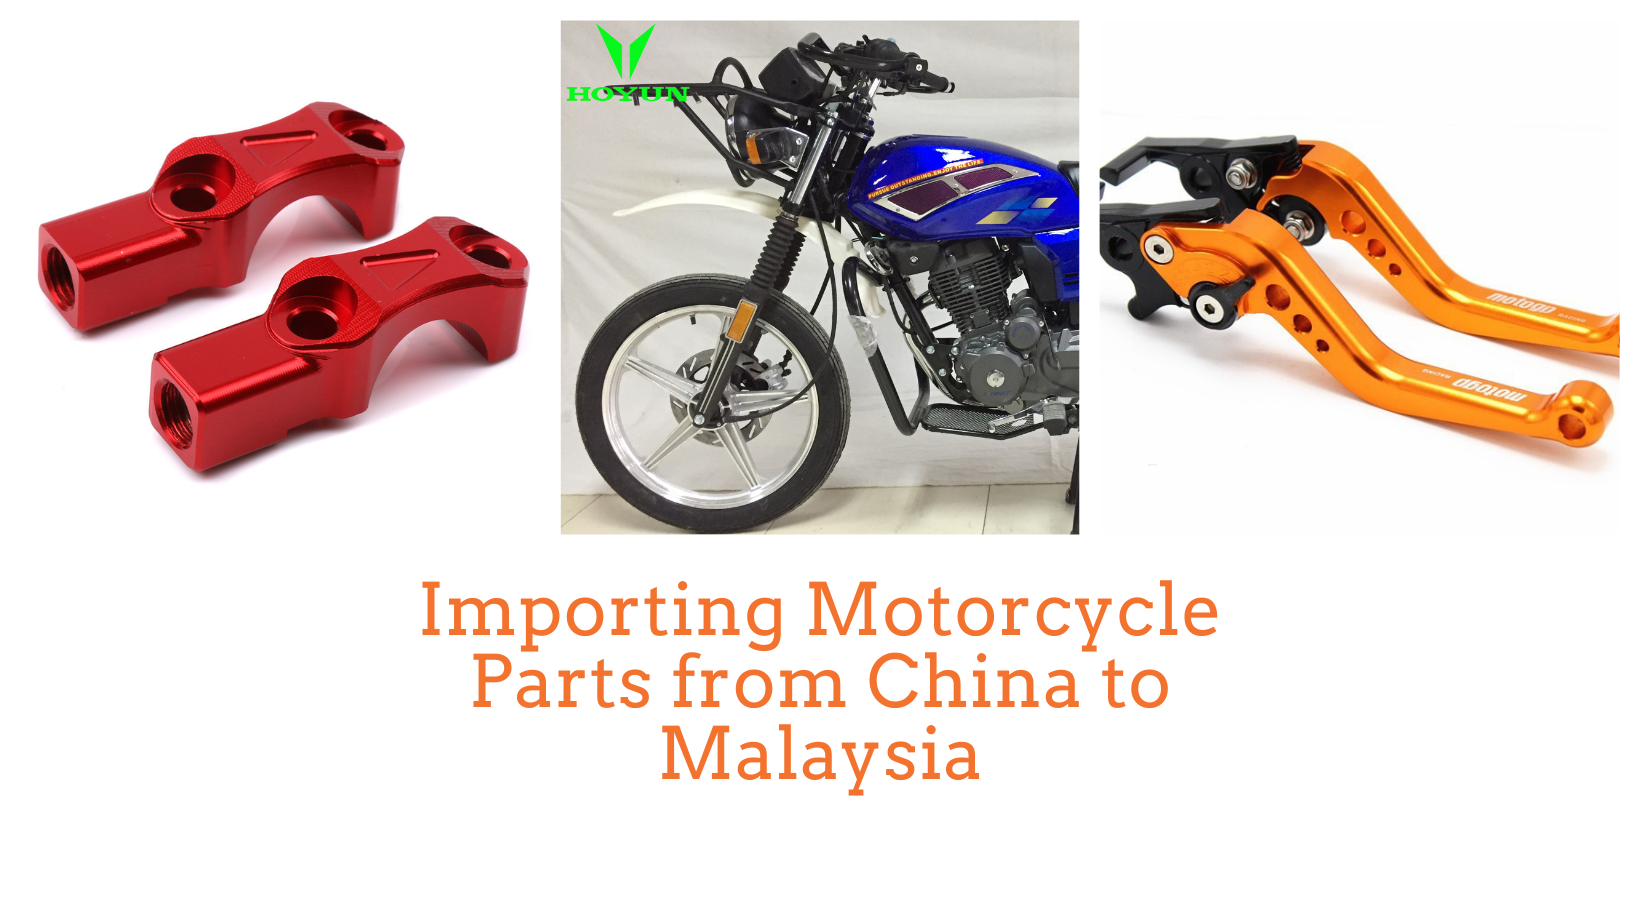 Importing Motorcycle Parts from China to Malaysia